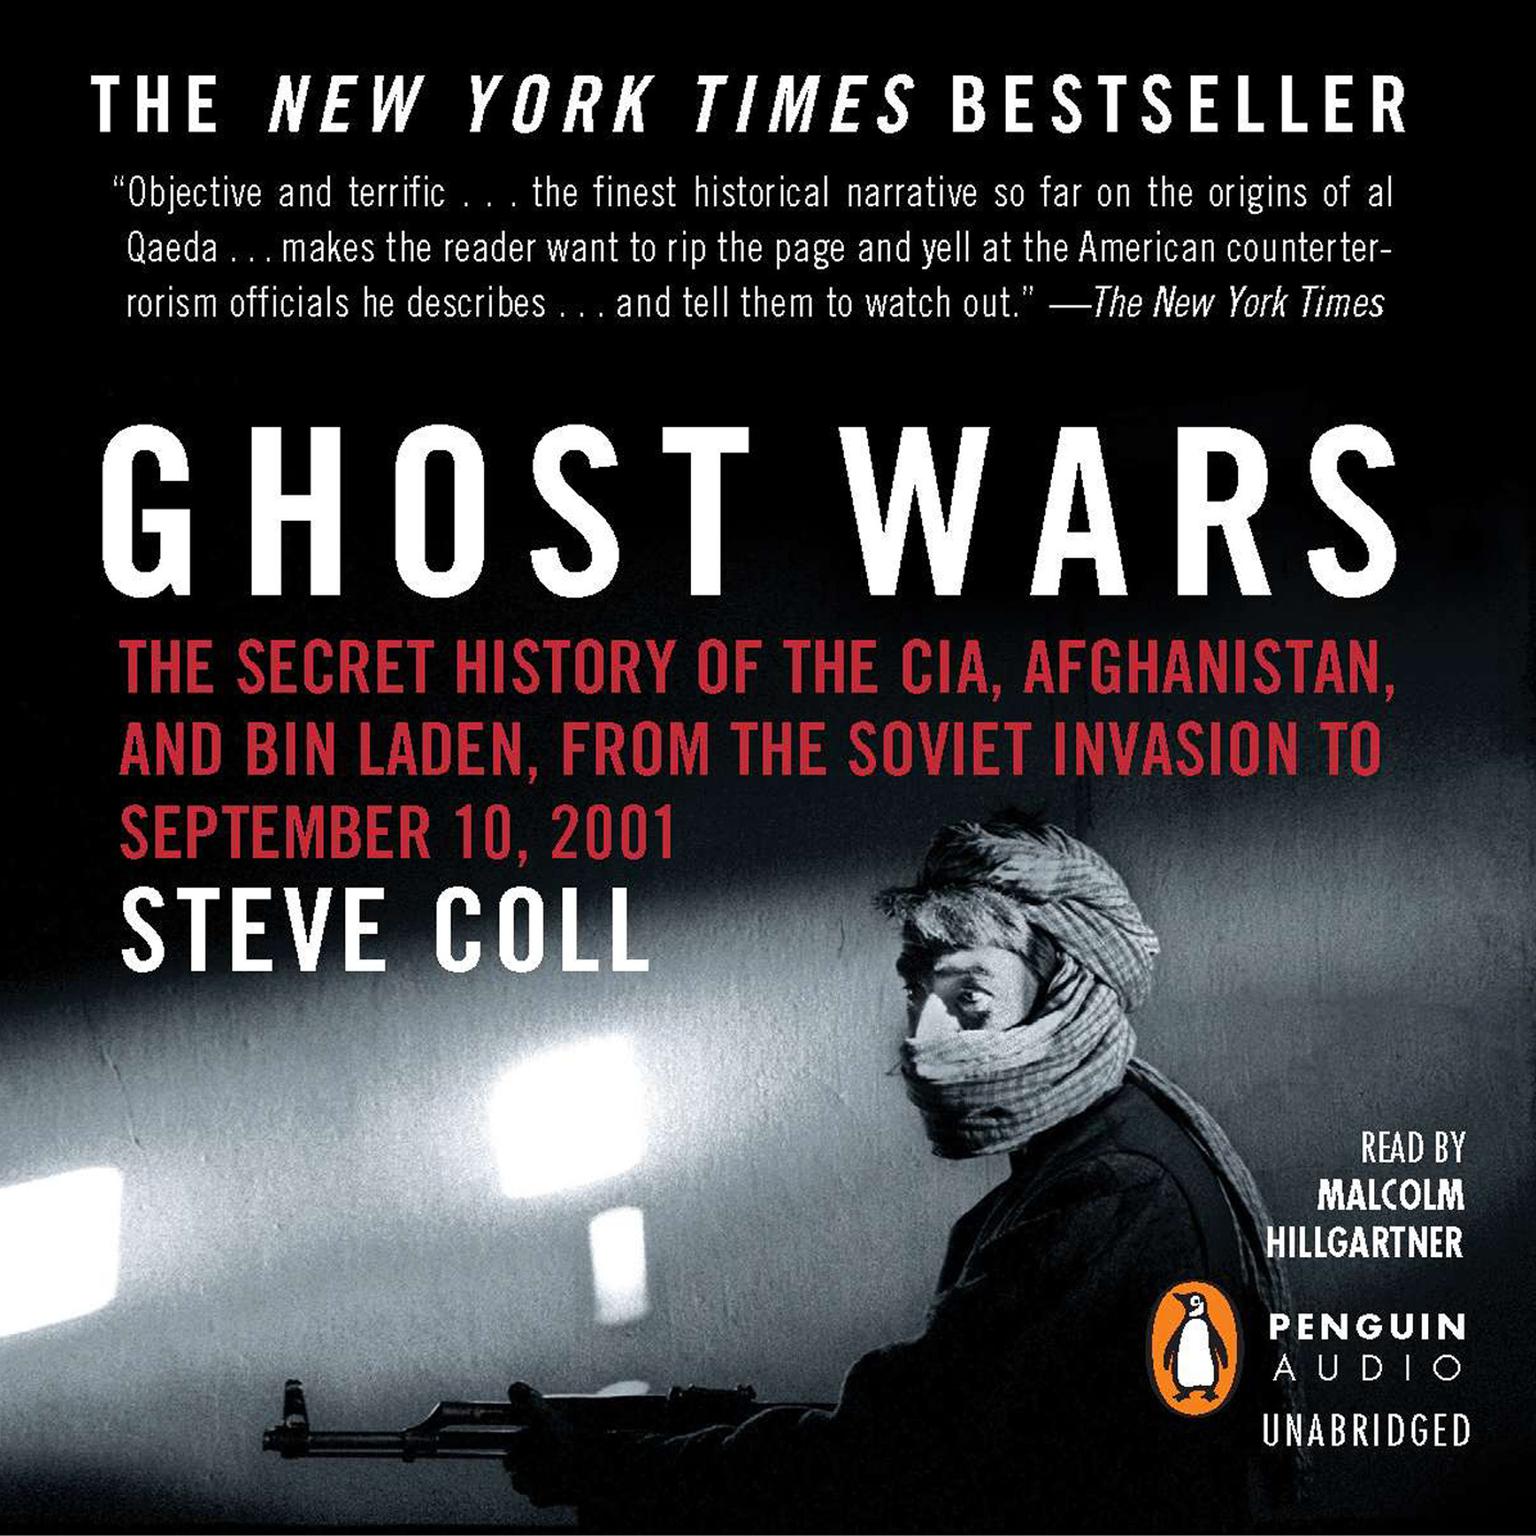 Ghost Wars: The Secret History of the CIA, Afghanistan, and bin Laden, from the Soviet Invas ion to September 10, 2001 (Pulitzer Prize Winner) Audiobook, by Steve Coll